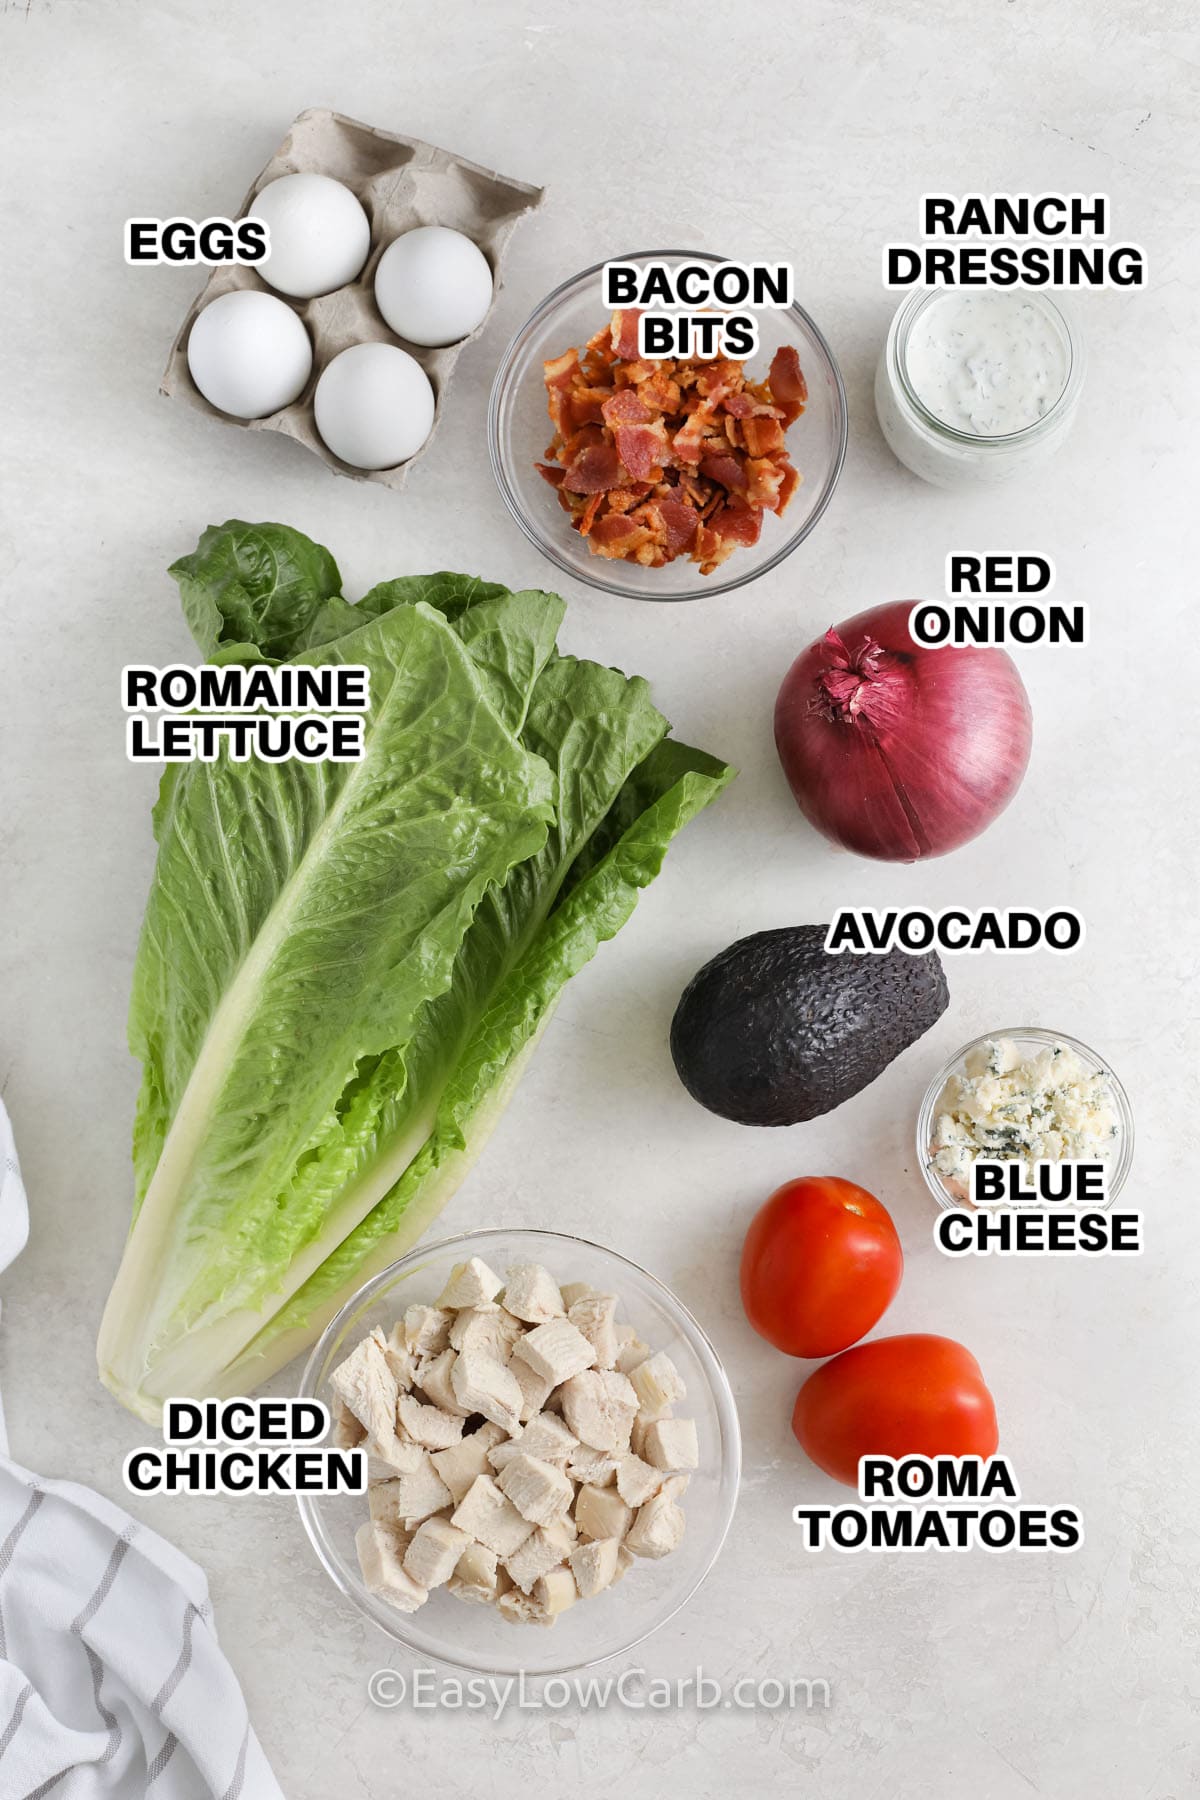 Cobb Salad Recipe ingredients including eggs, bacon bits, ranch dressing, red onion, avocado, blue cheese, roma tomatoes, diced chicken, and romaine lettuce